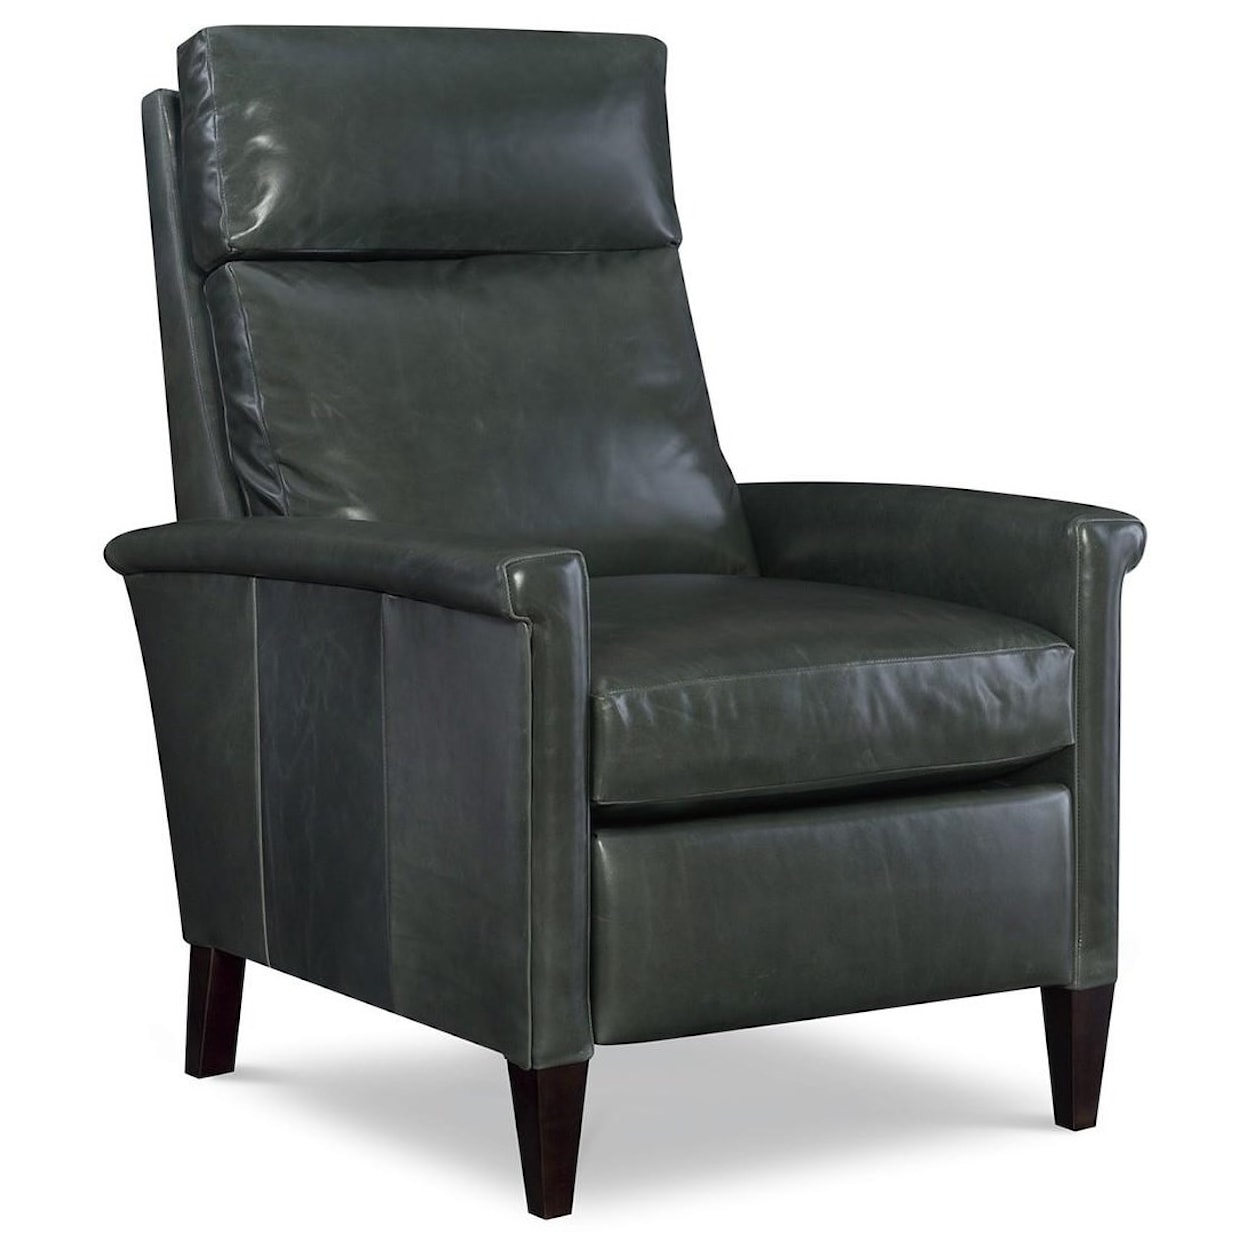 C.R. Laine Chairs and Chaises Noah Leather Manual Recliner